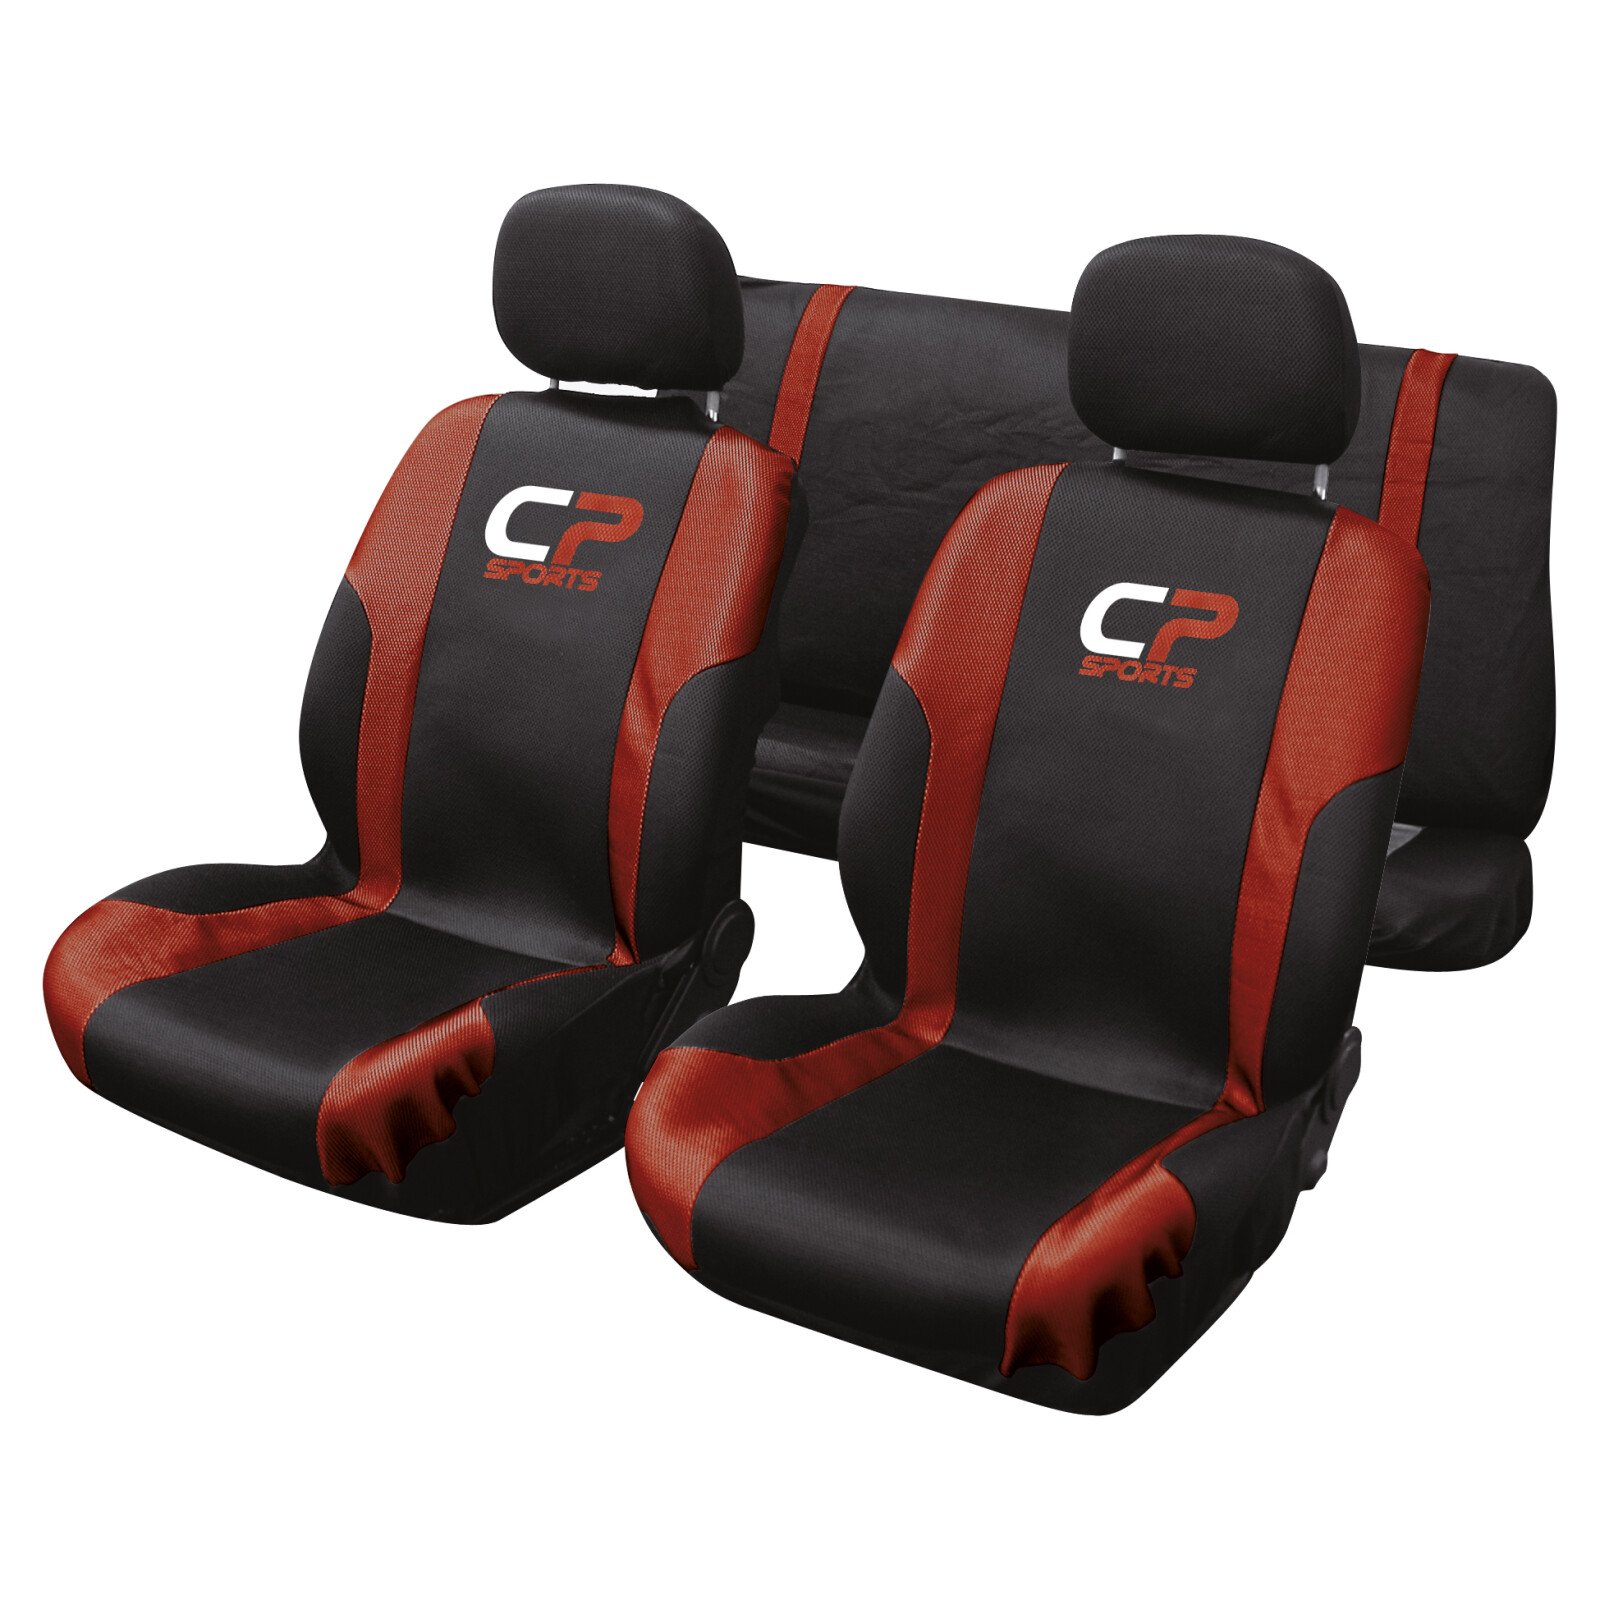 CP Sports seat covers 9pcs - Red/Black thumb